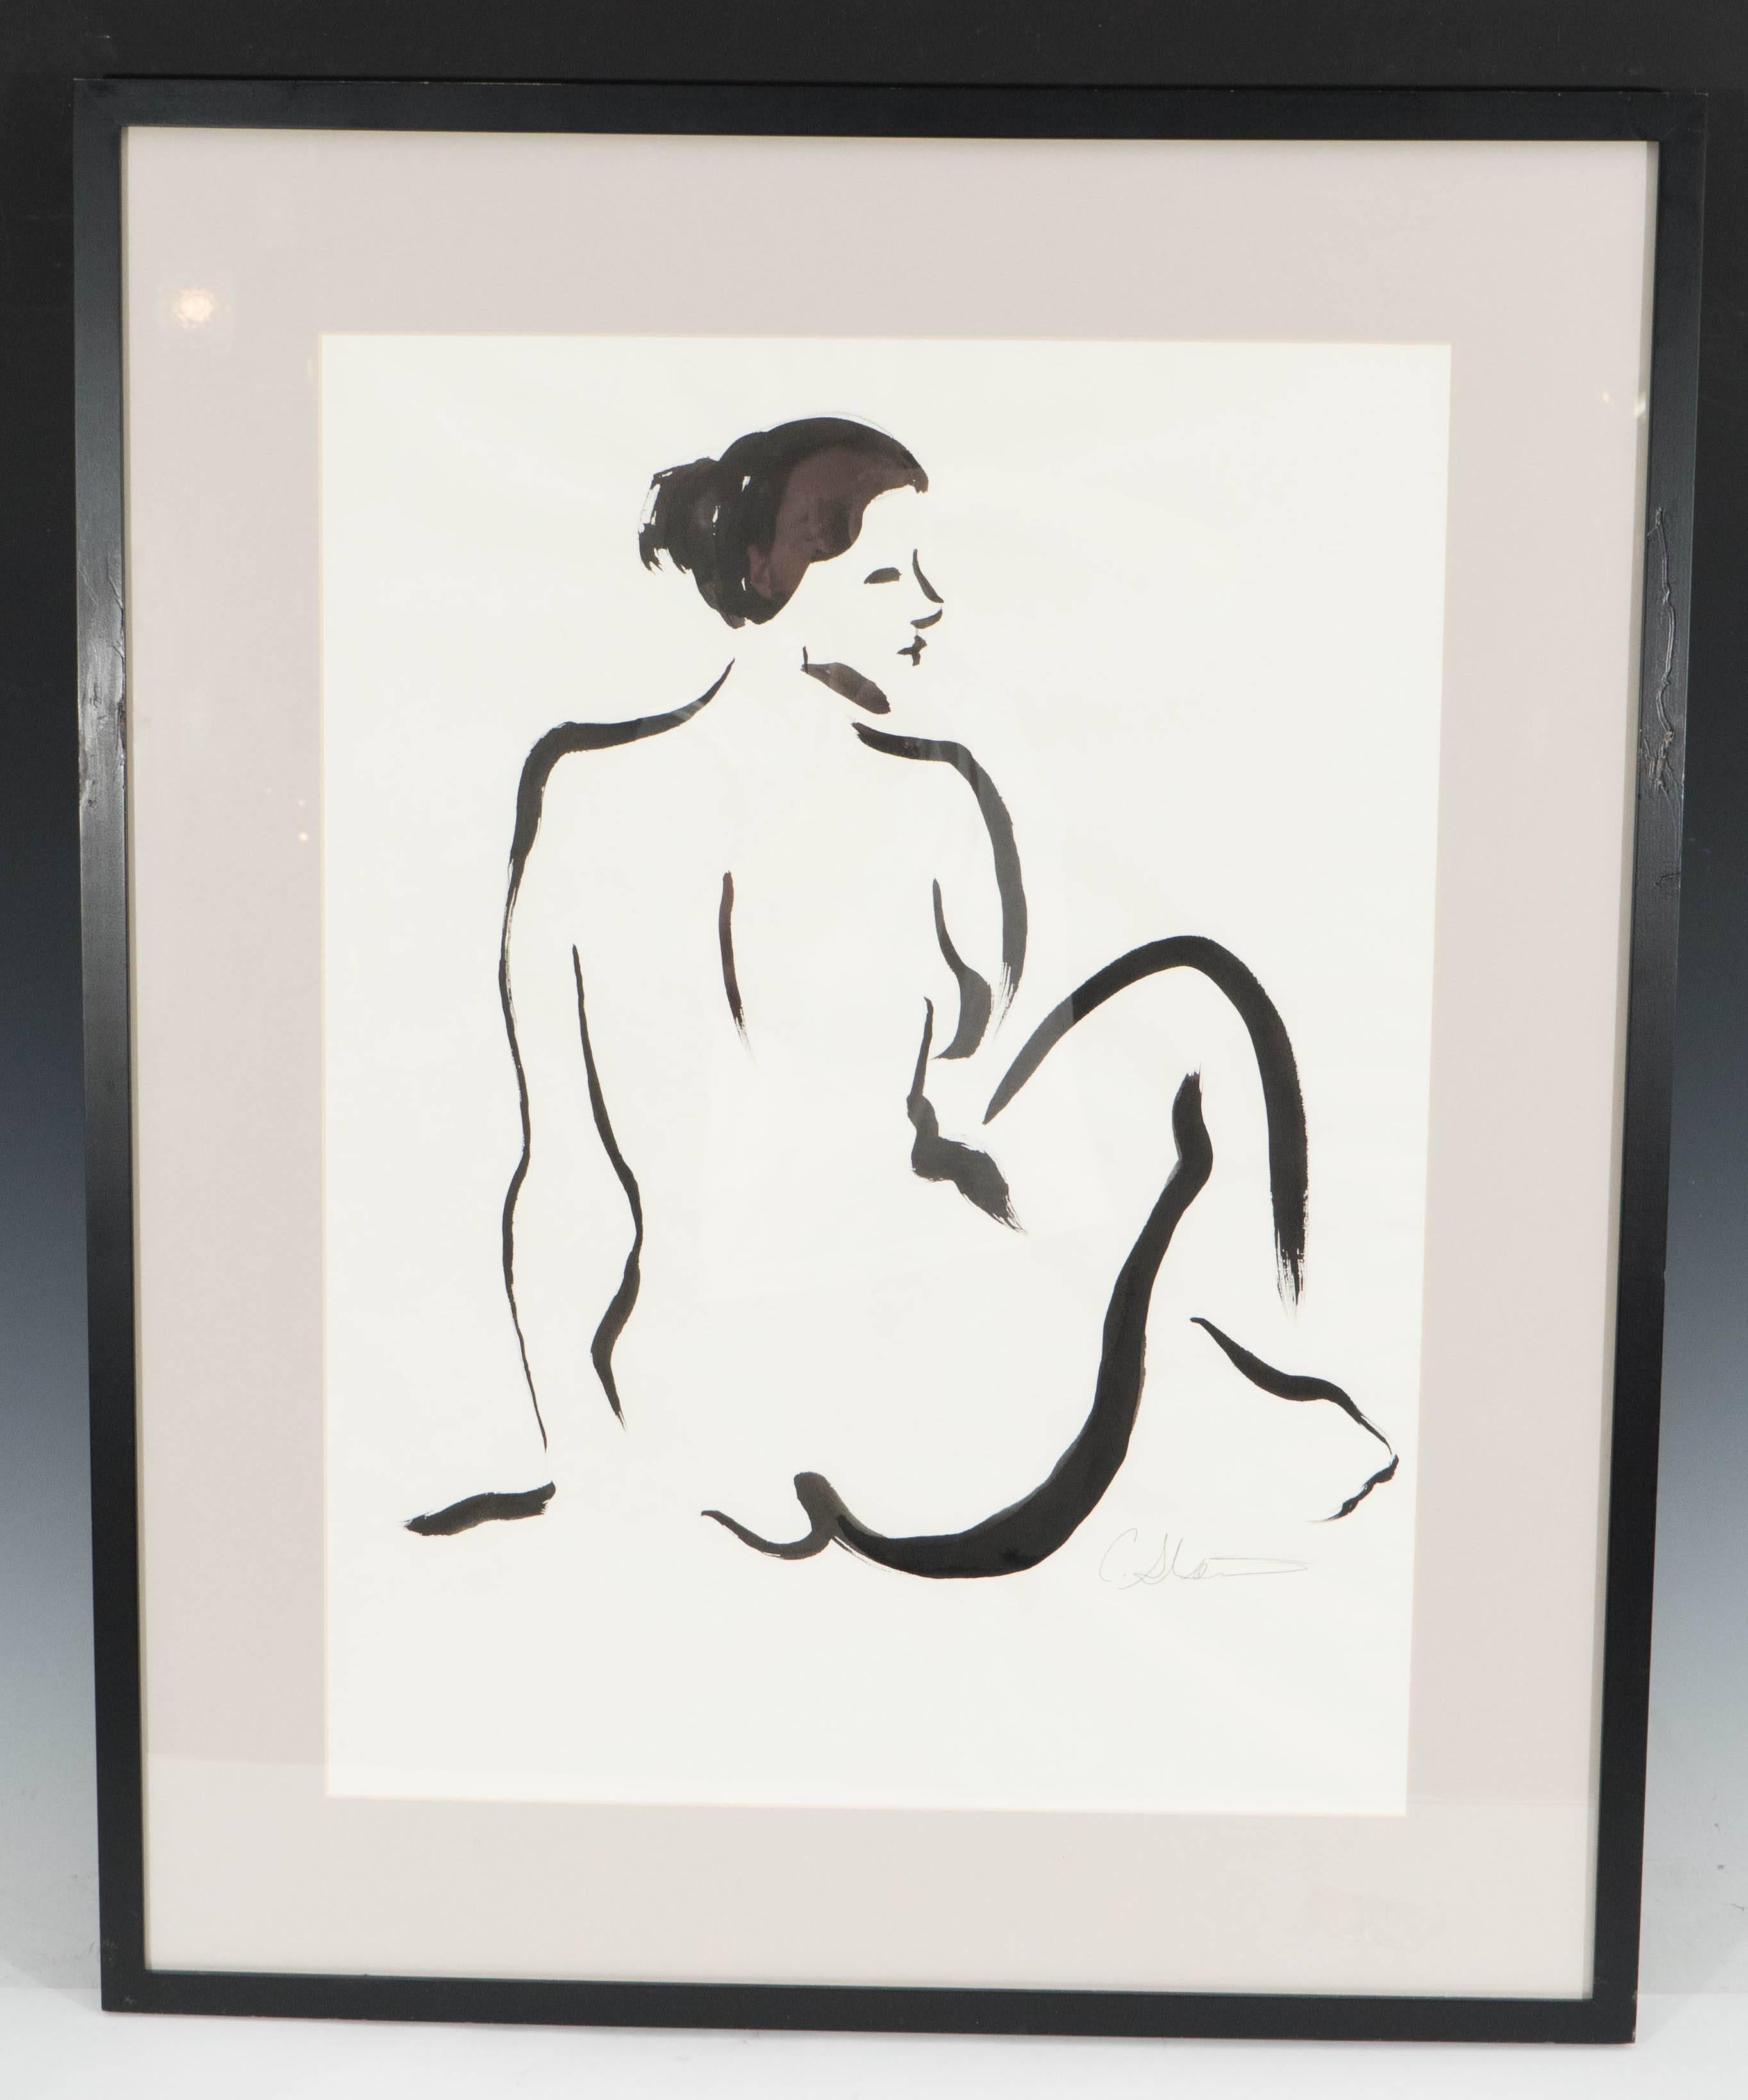 A set of five ink lithographs on paper, each depicting a unique study of a nude female figure, in the minimalist style. Markings include the artist's signature (indiscernible). Very good condition, consistent with age and use, minor wear to frames.